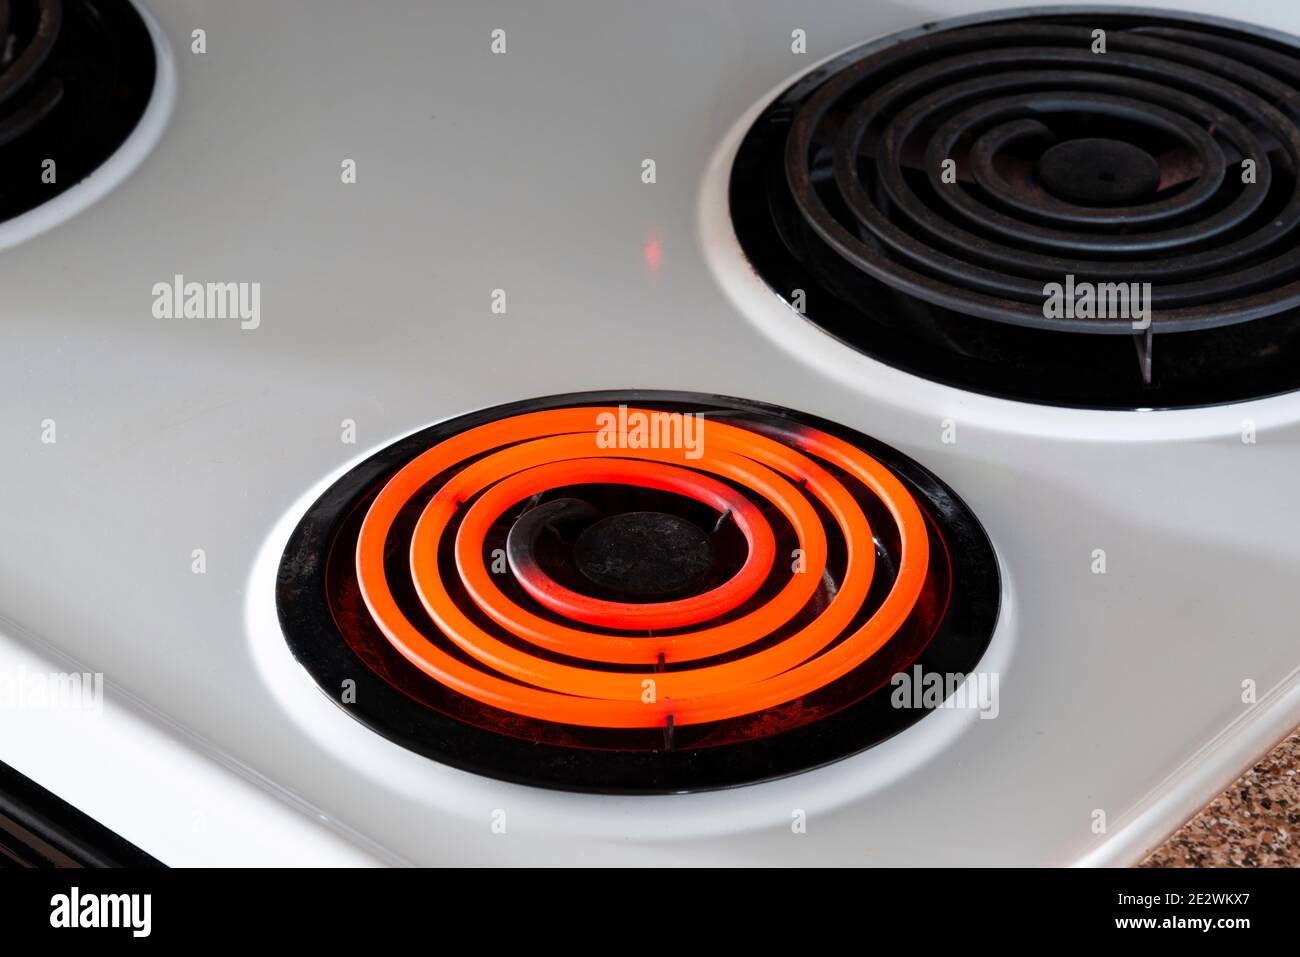 Horizontal shot of a white stove top with one hot burner and two off.  Shot at an angle. Stock Photo